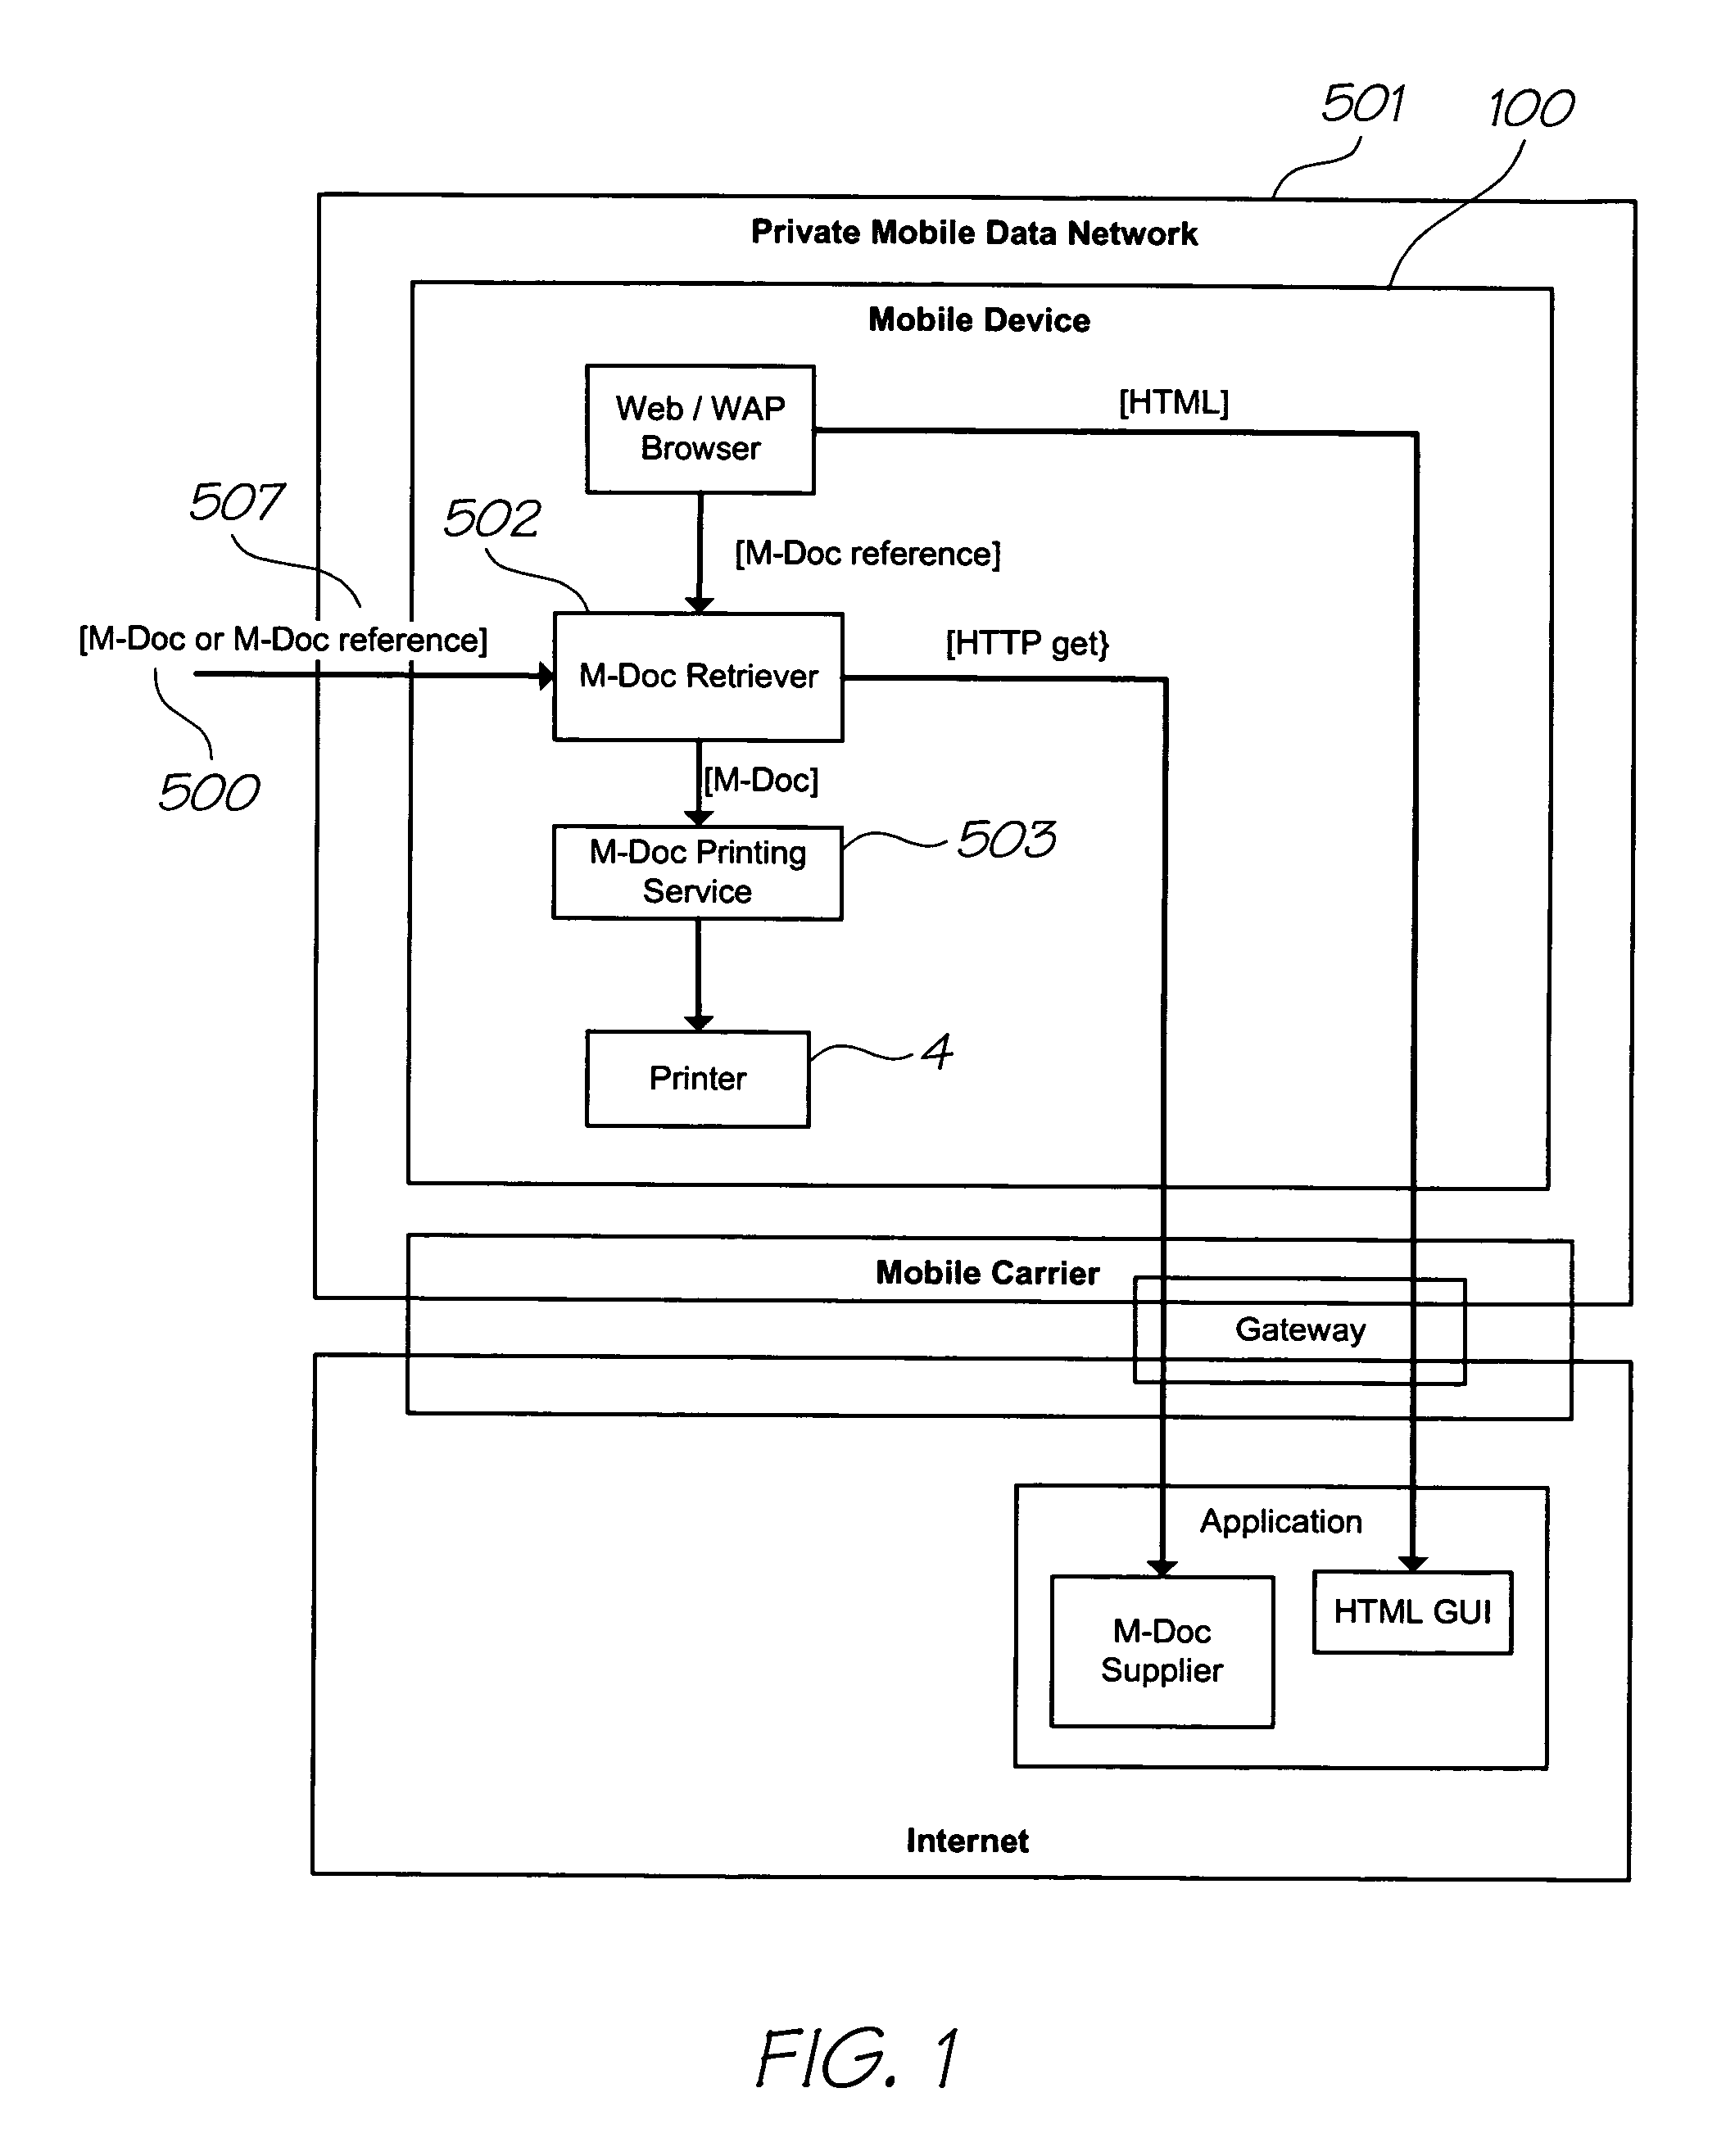 Printing audio information using a mobile device